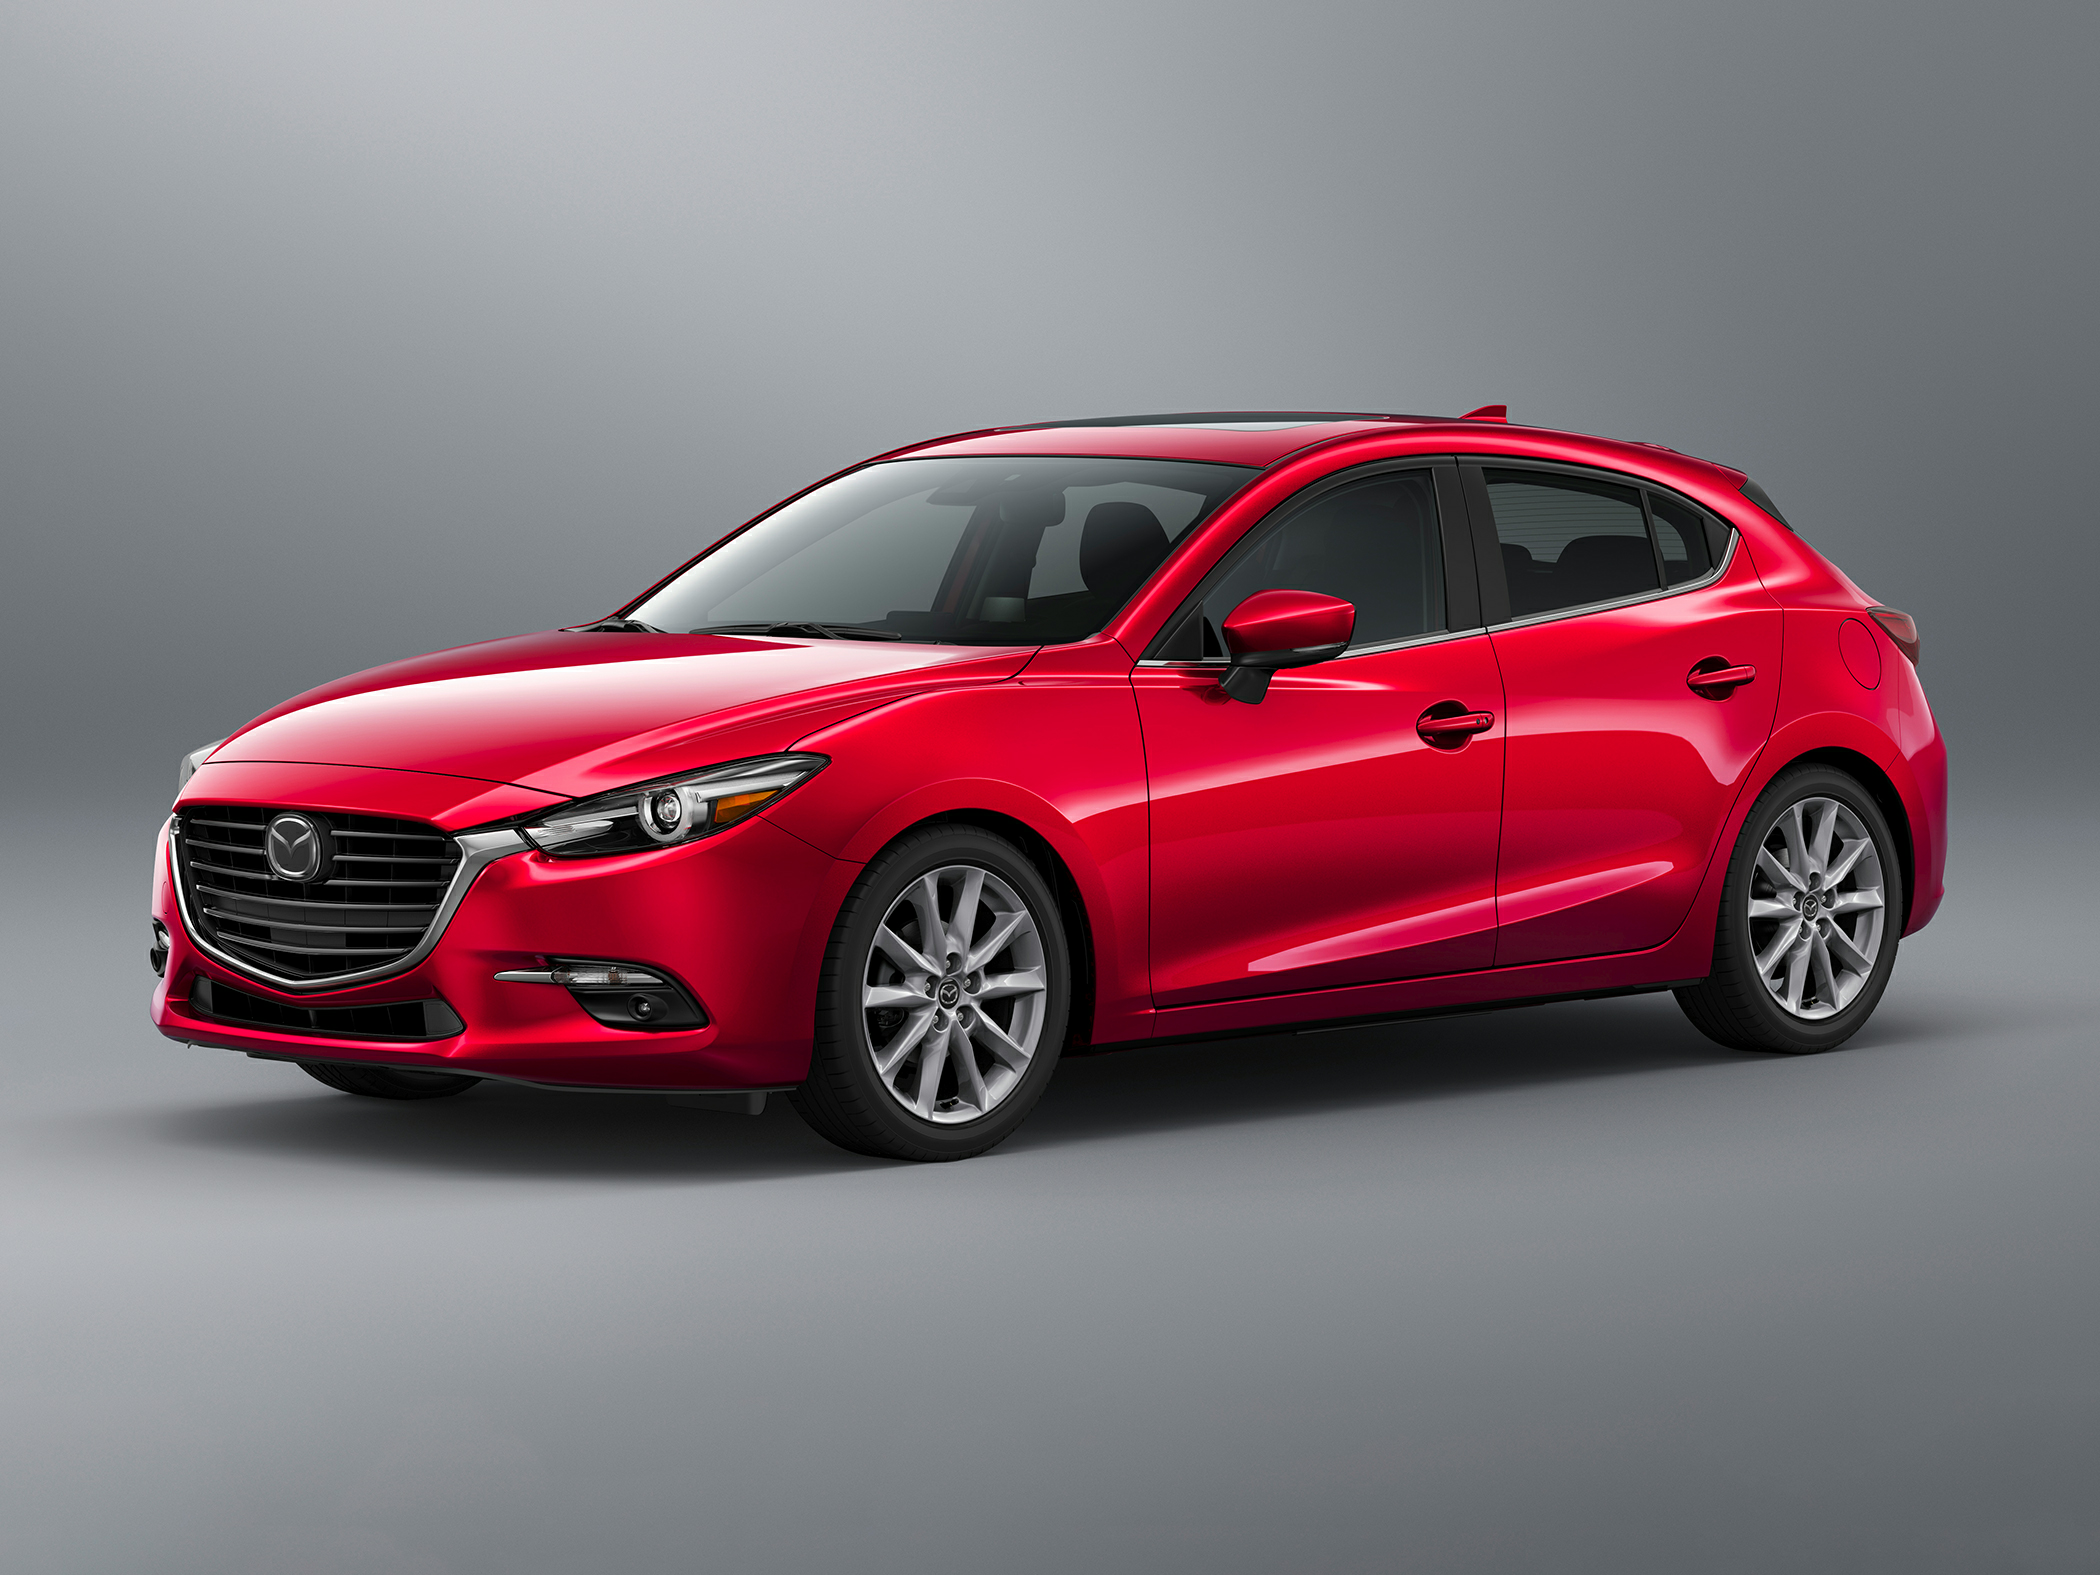 2017 Mazda 3 Grand Touring review: Our favorite hatch